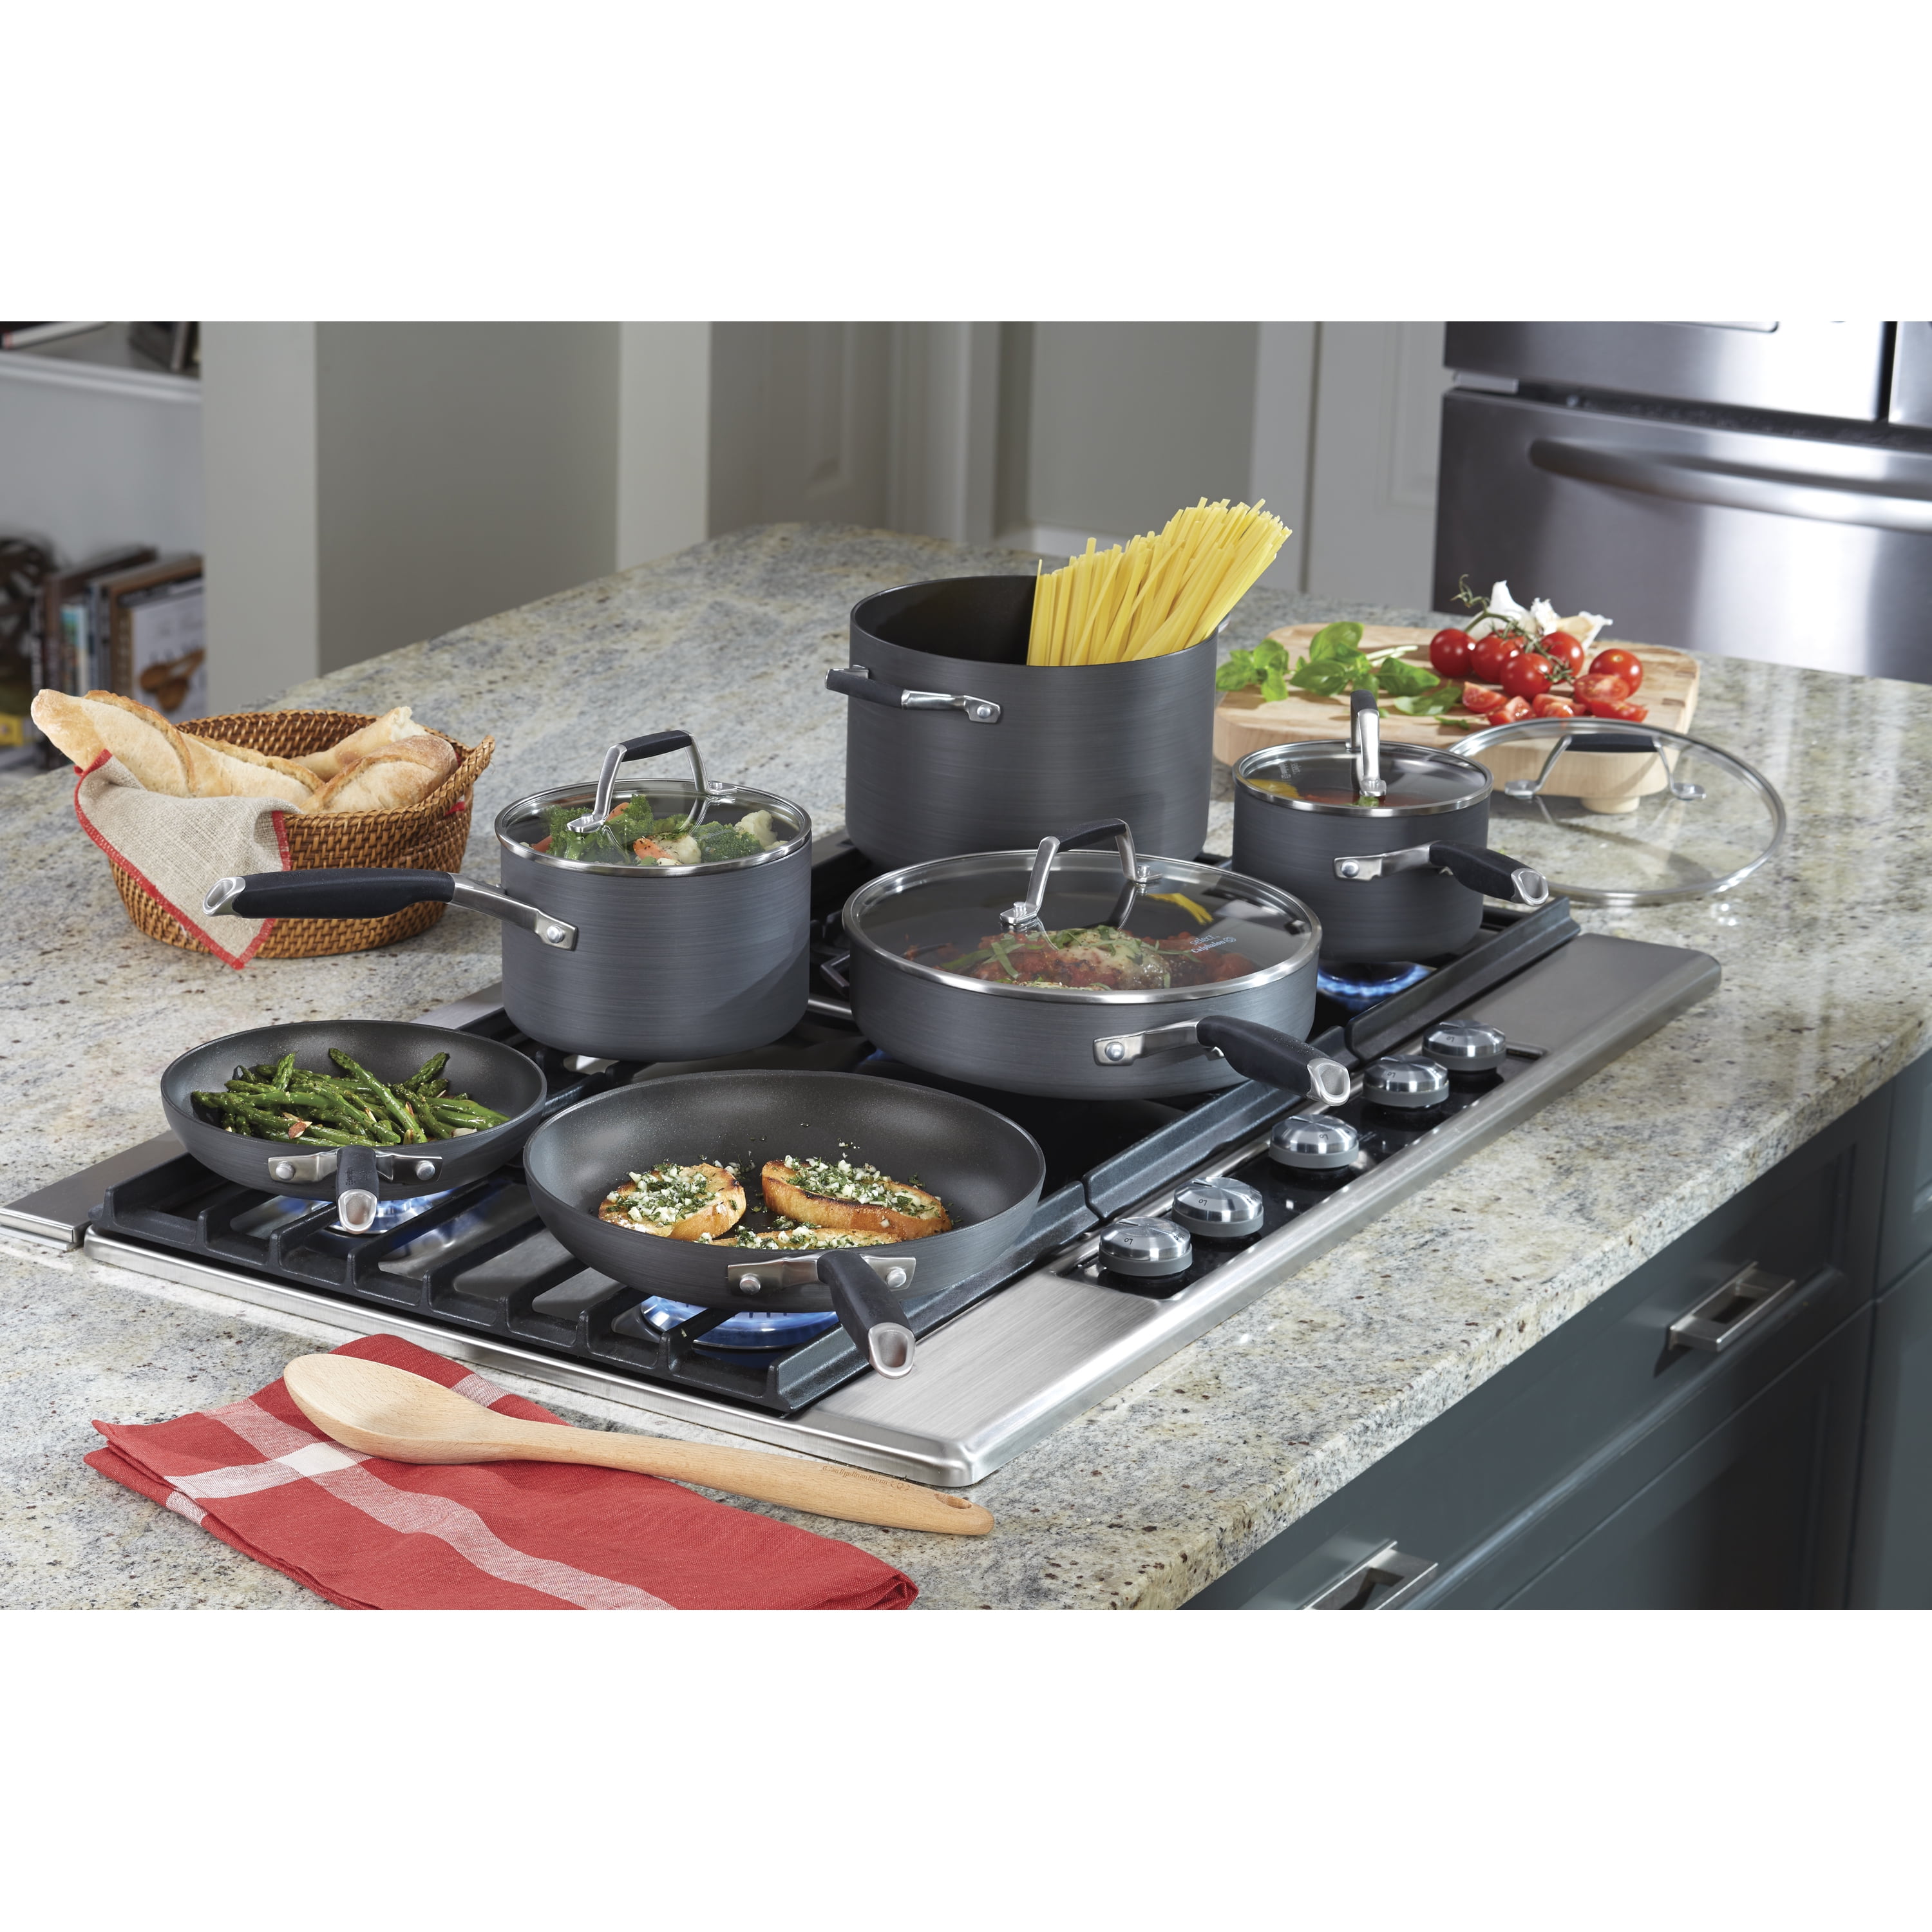 Select by Calphalon Hard-Anodized Nonstick Fry Pan, 10 in - Kroger